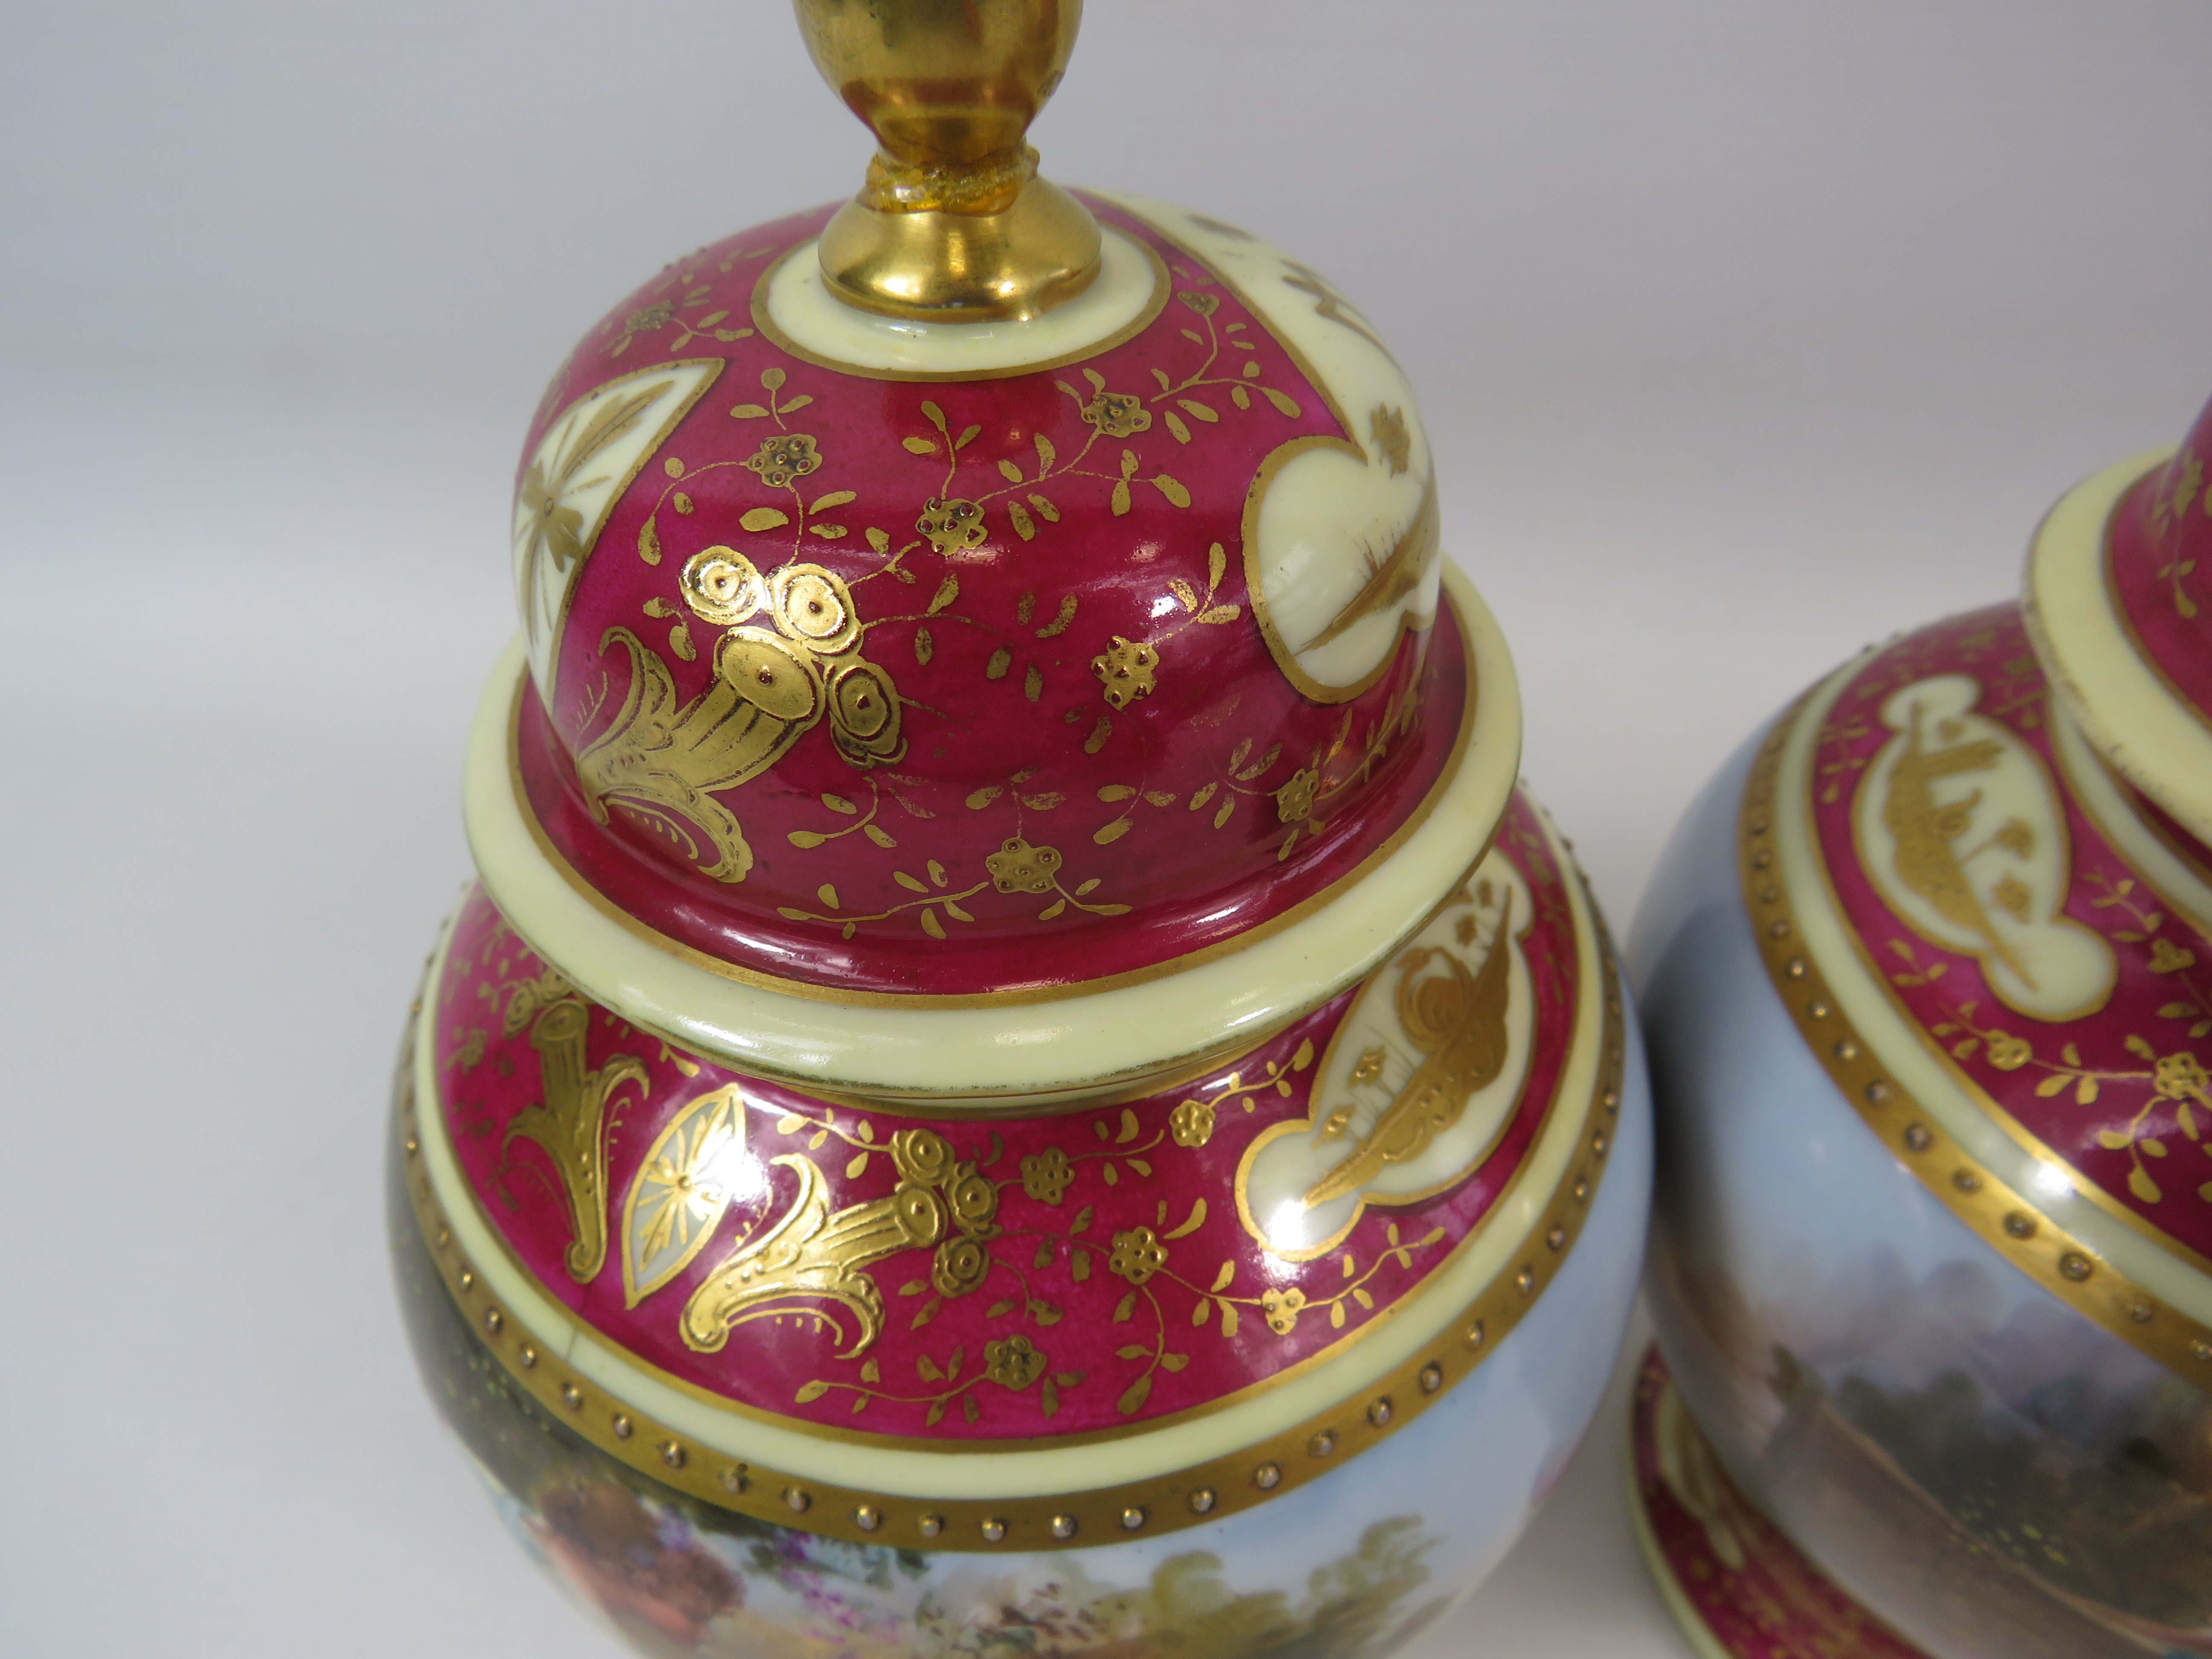 Pair of Vienna style lidded urn vases, both have had a repair/ damage to the lids. Approx 9" tall. - Image 3 of 6